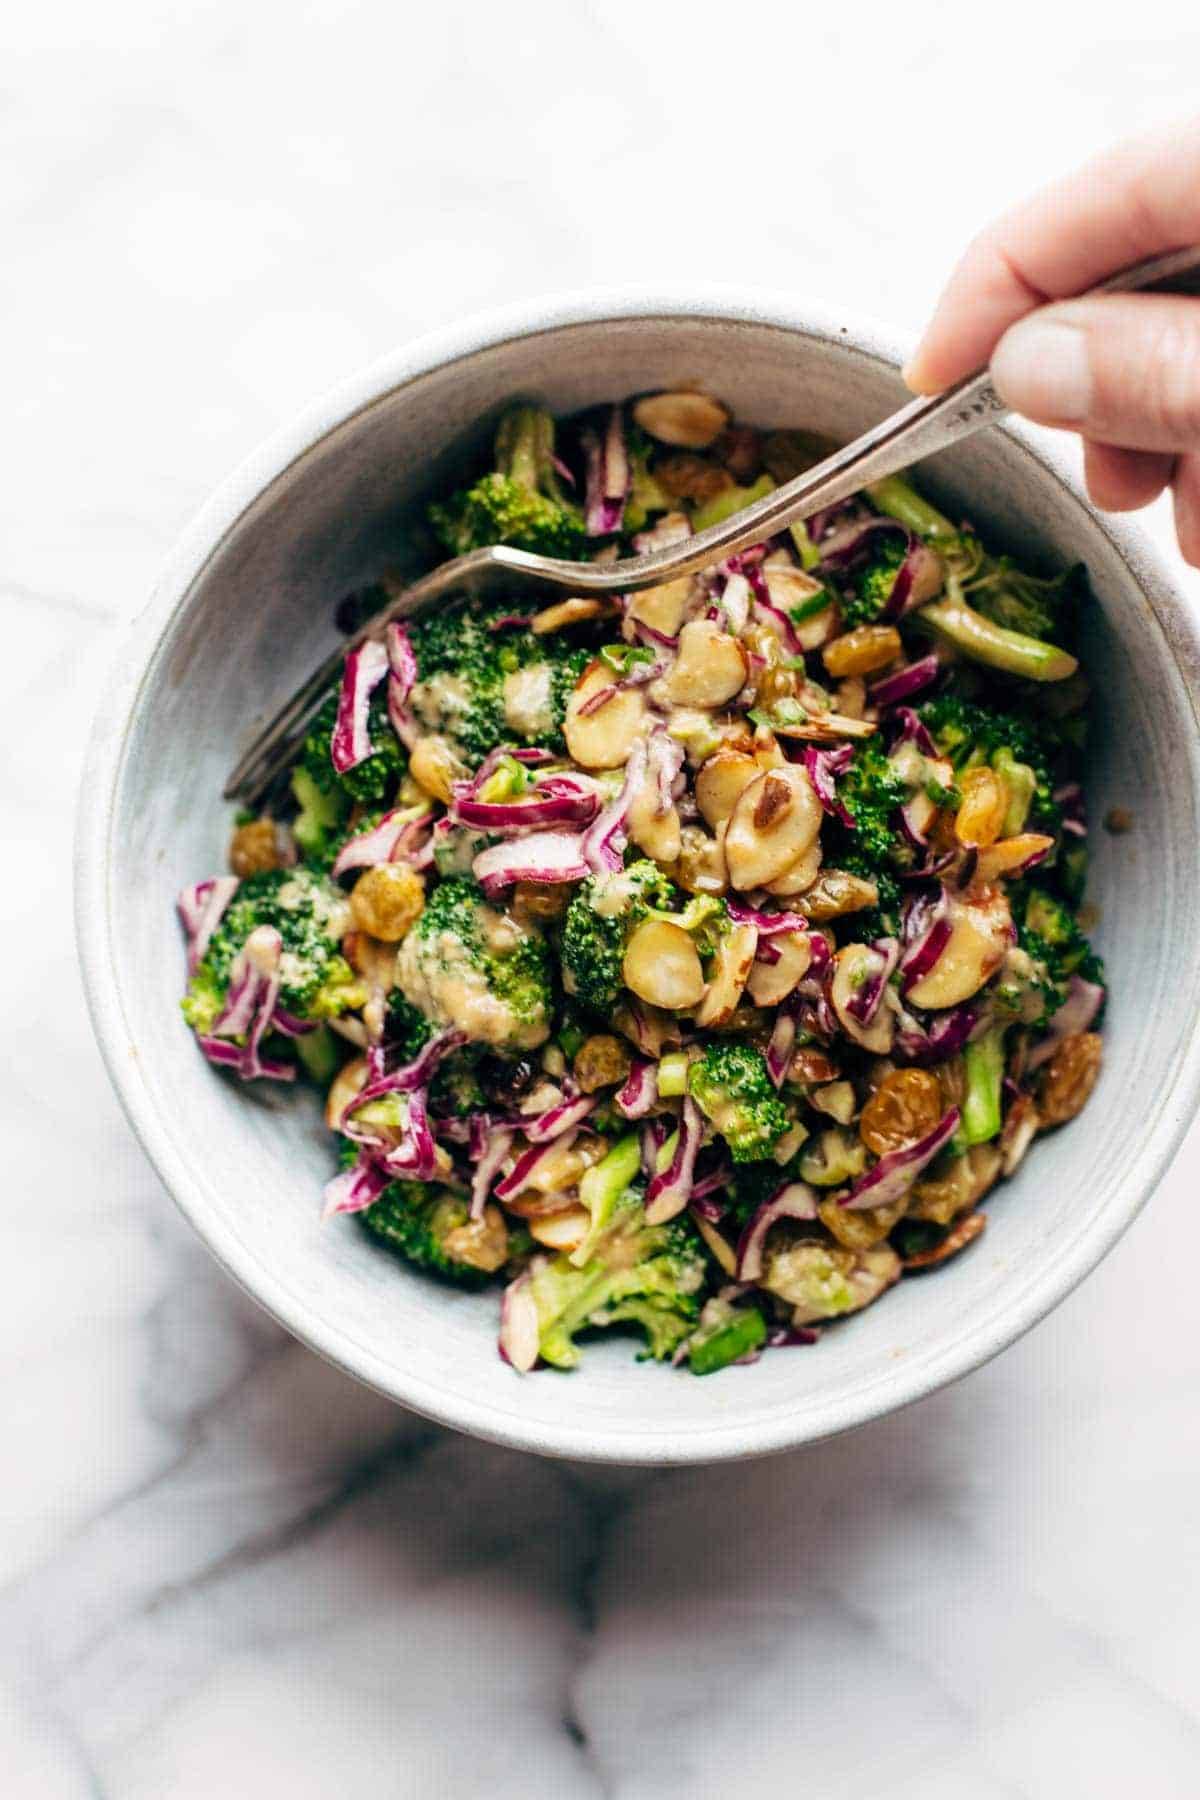 Broccoli salad in a bowl with a hand holding a fork.